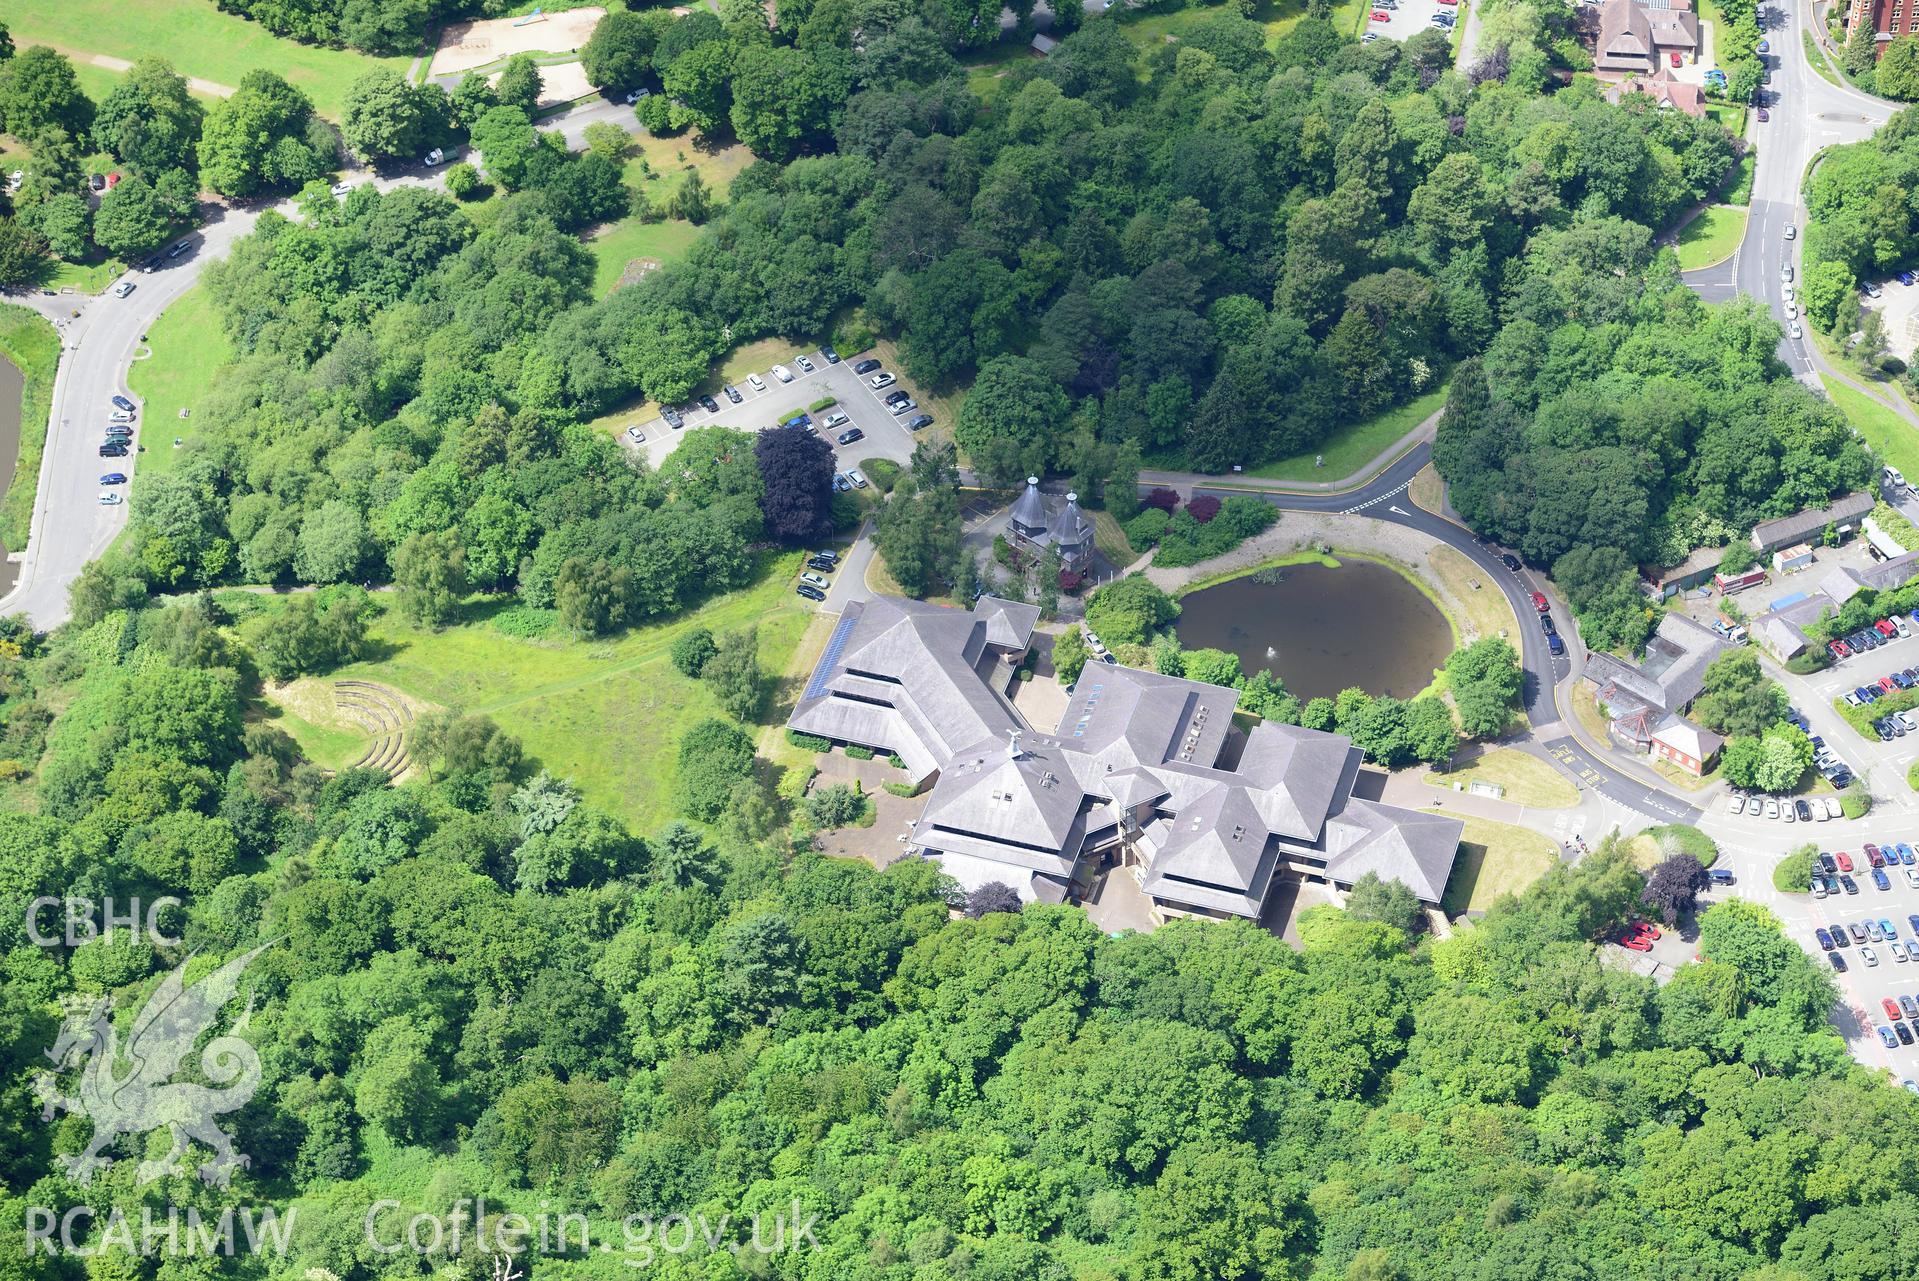 Powys County Hall, Lake Cottage and the site of Pump House and Pump House Hotel, Llandrindod Wells. Oblique aerial photograph taken during the Royal Commission's programme of archaeological aerial reconnaissance by Toby Driver on 30th June 2015.